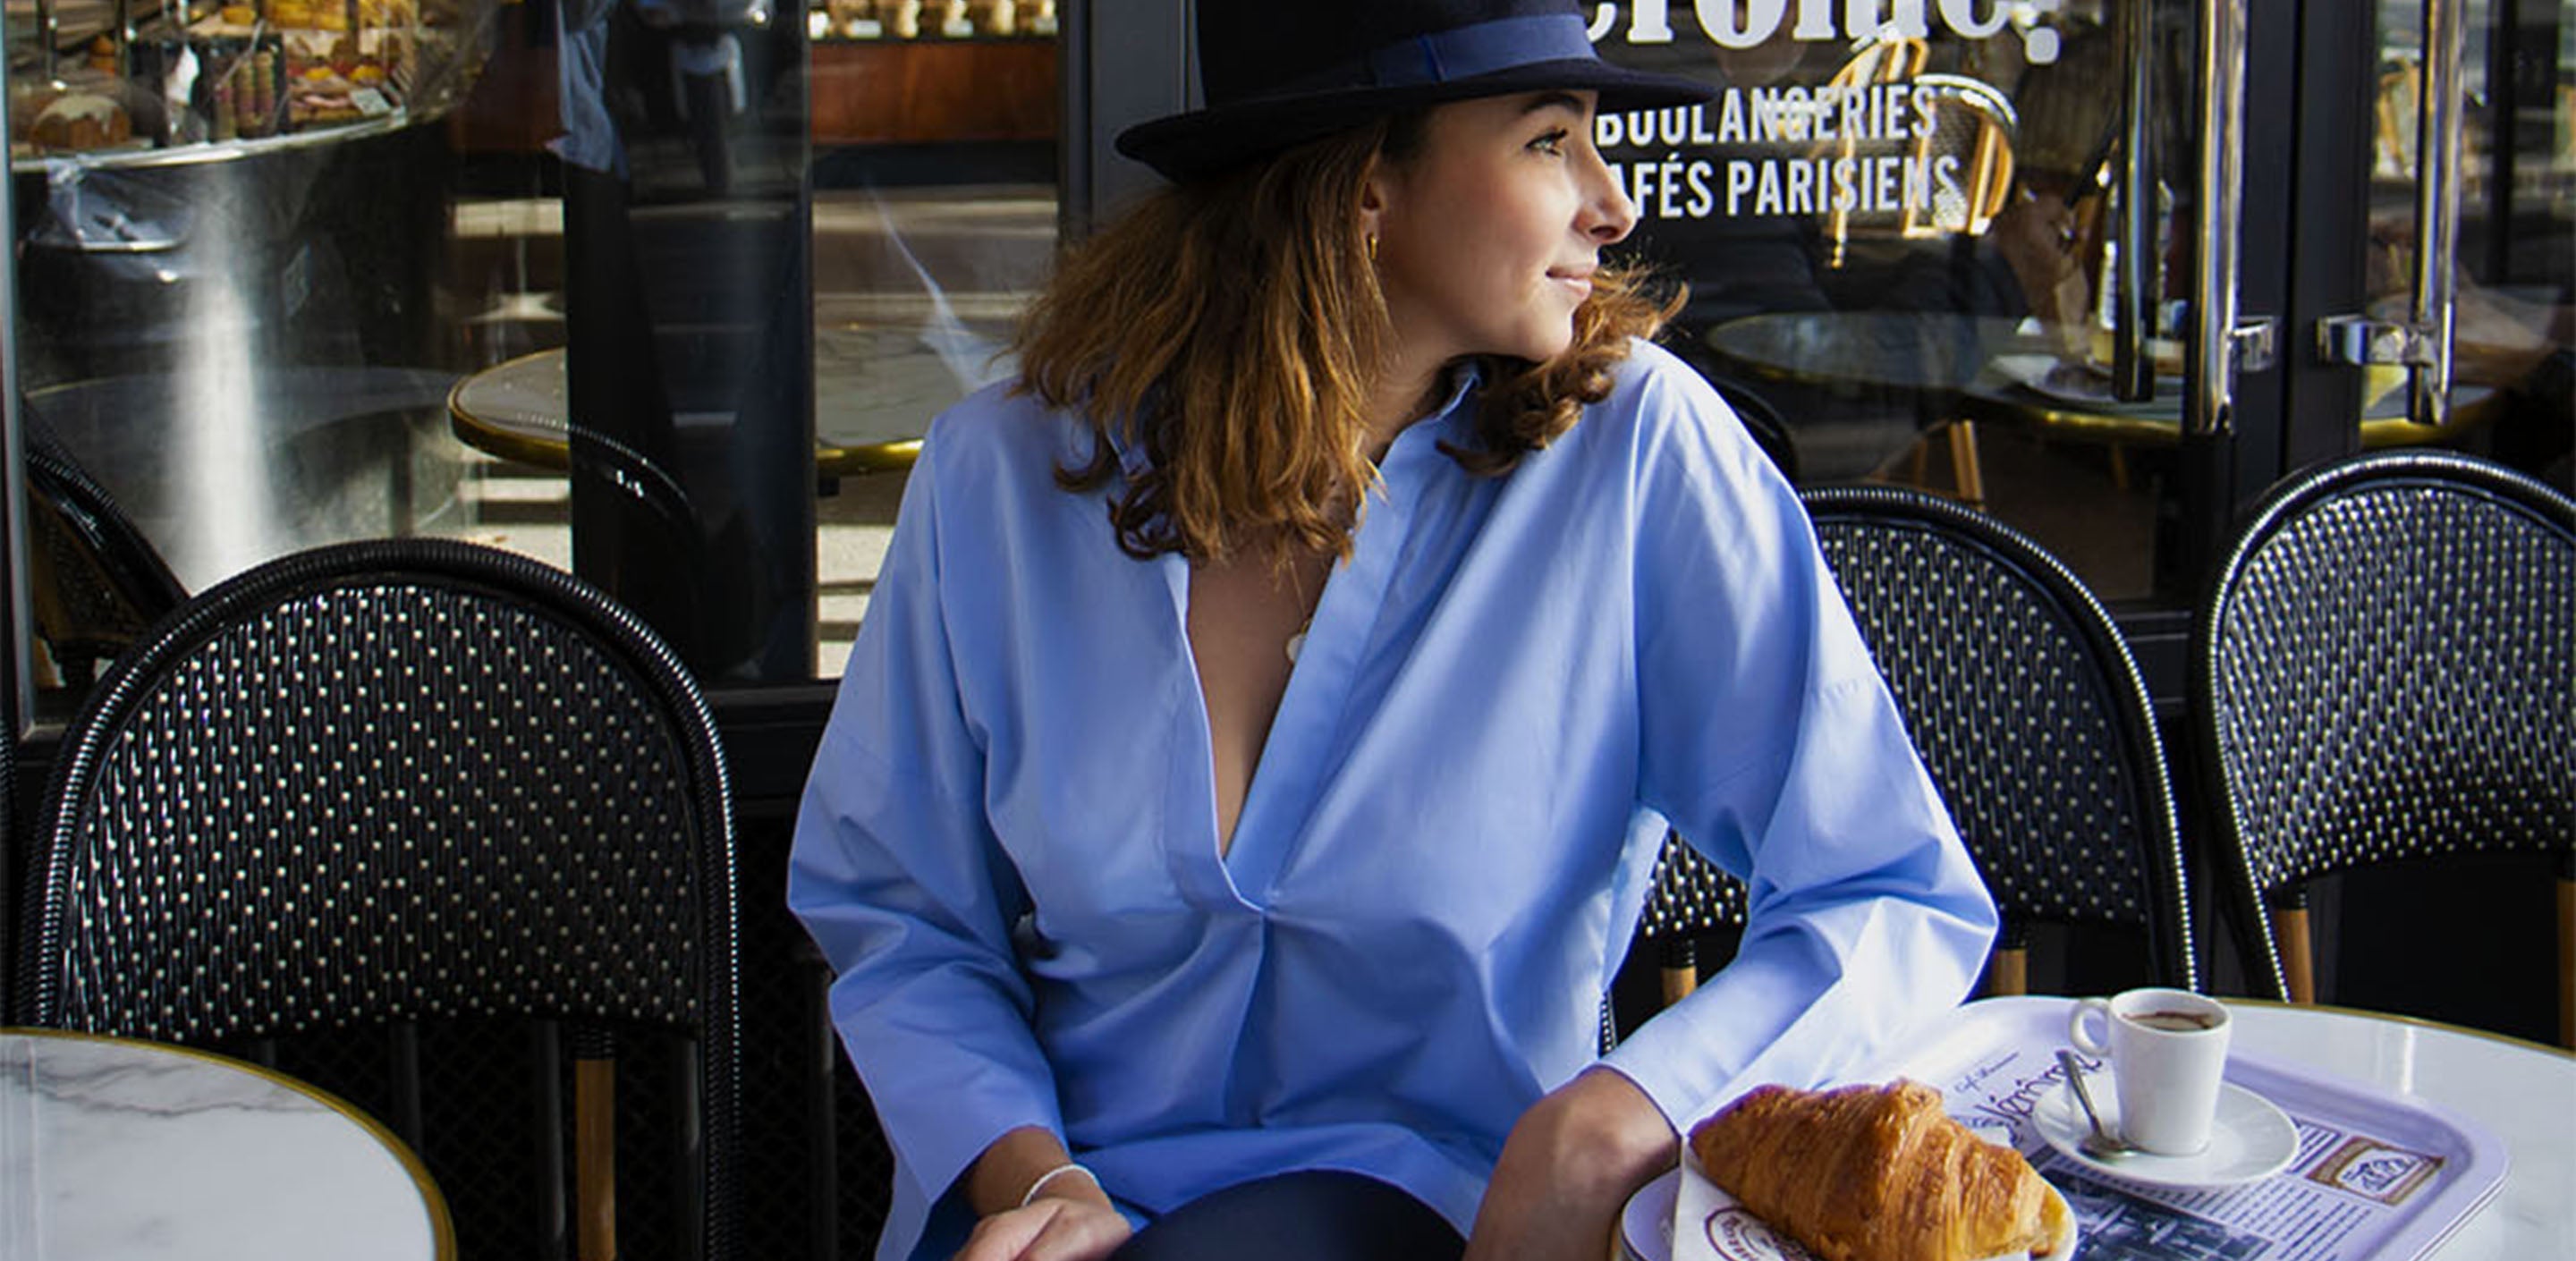 saint andre anahide shirt worn on the terrace of a parisian cafe